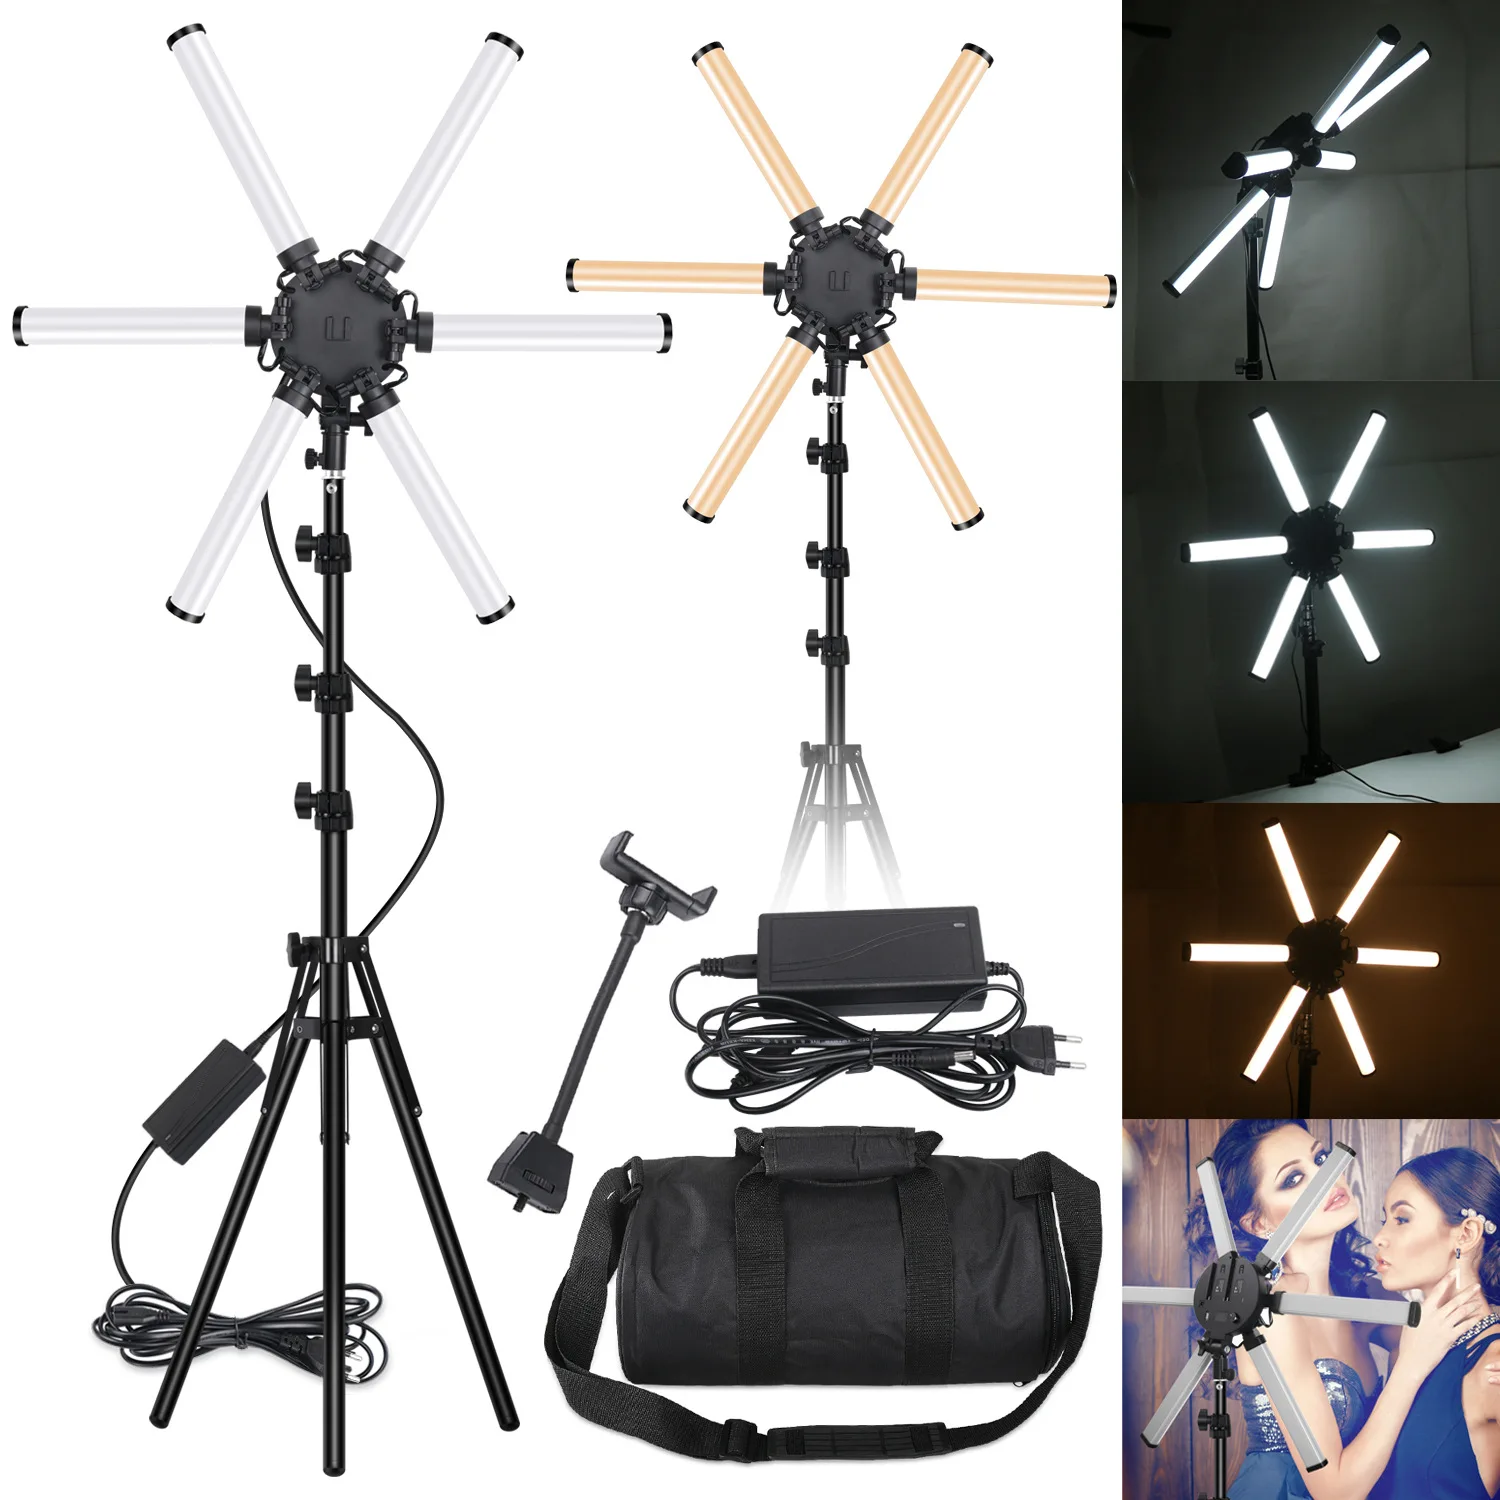 

Video Lights Selfie LED Ring Light Dimmable Ring Lamp With Stand Tripods 6 Arms Light For TIKTOK Youtube Makeup ringlight